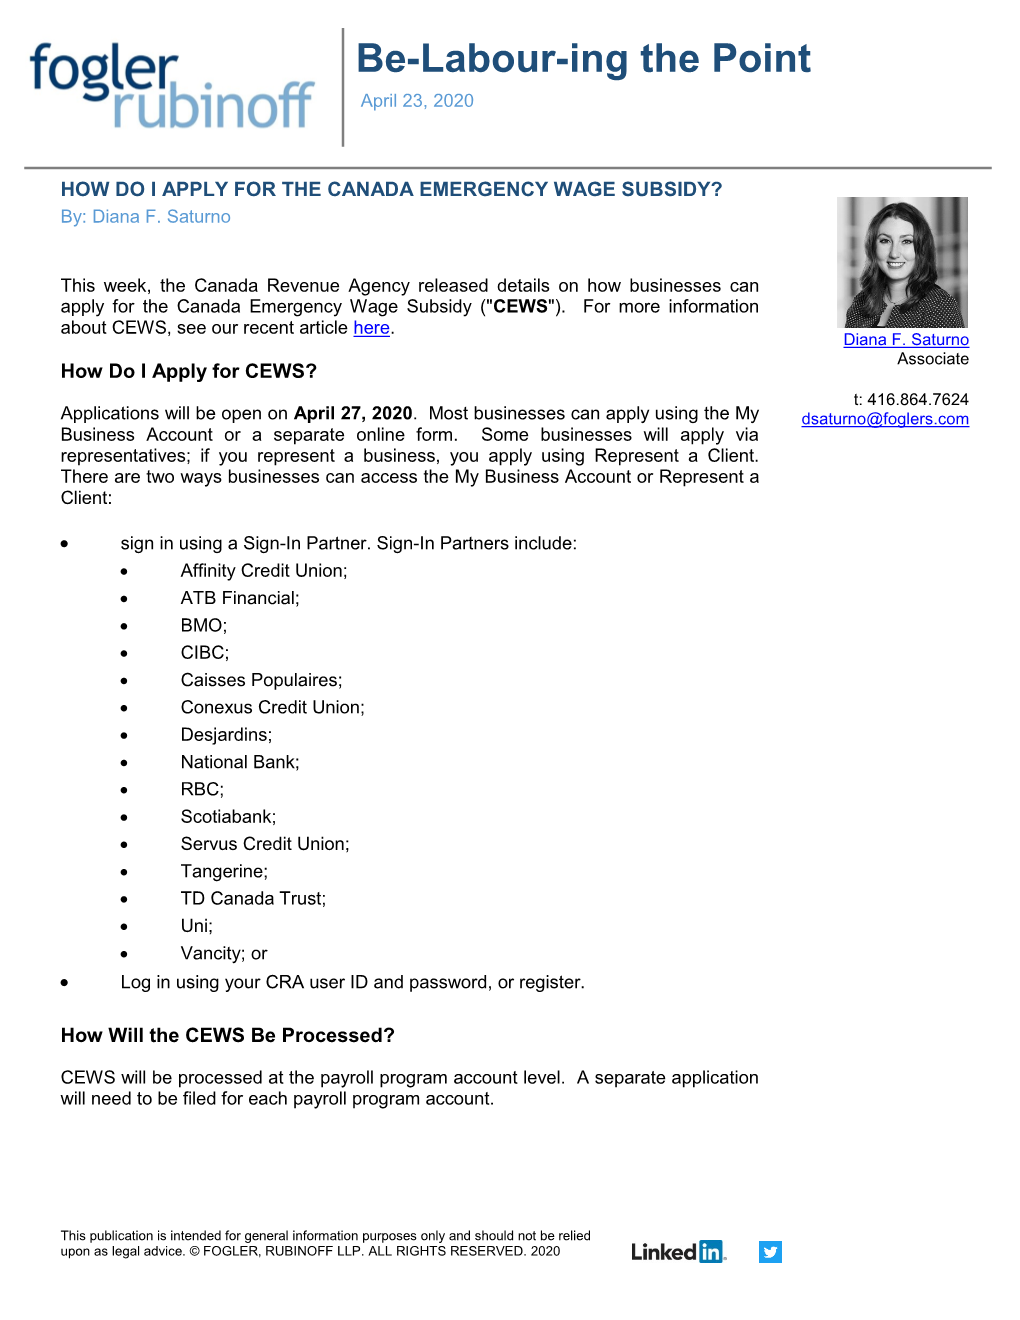 HOW DO I APPLY for the CANADA EMERGENCY WAGE SUBSIDY? By: Diana F